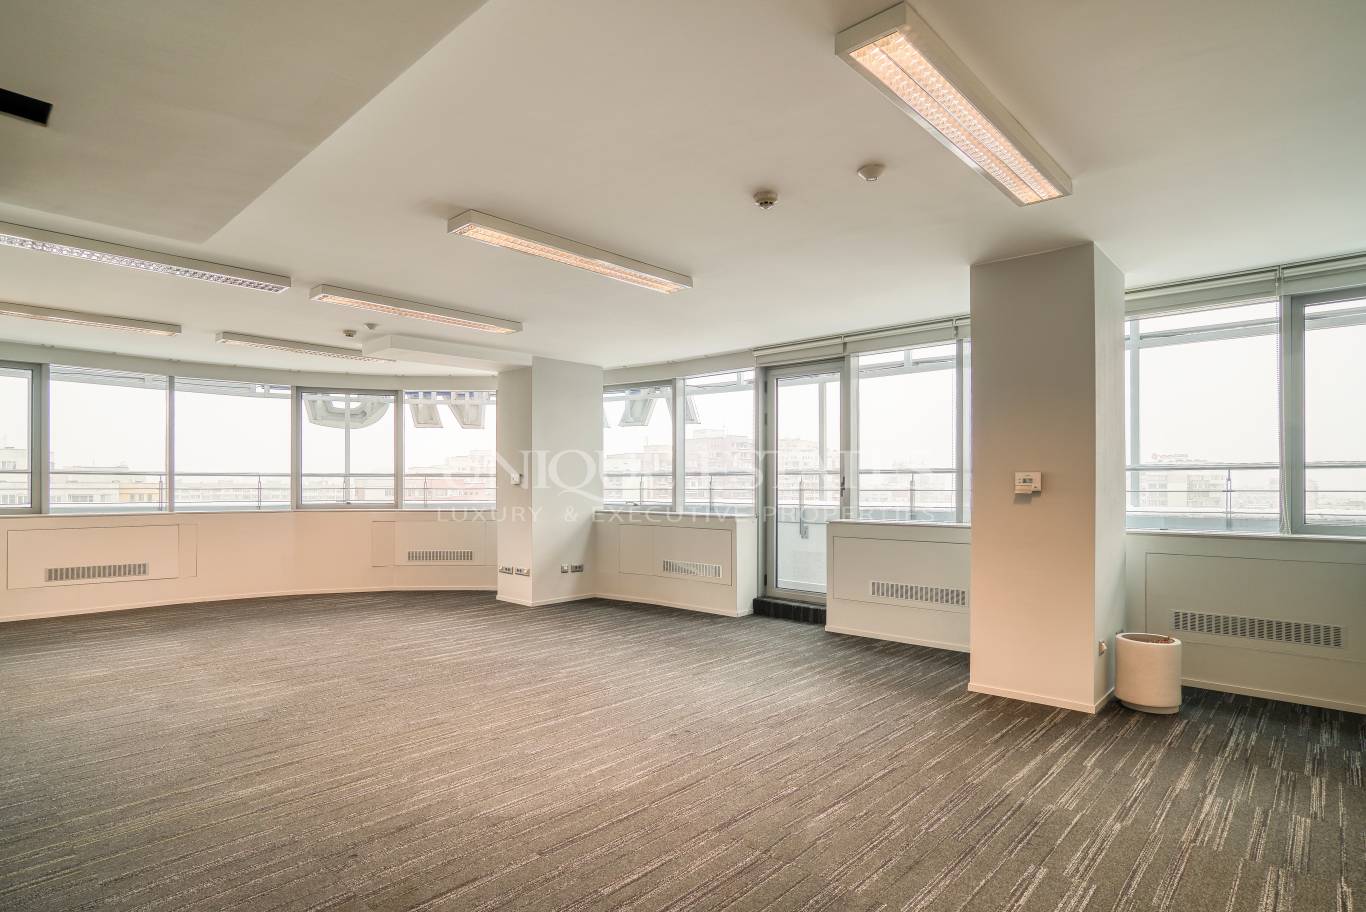 Office for rent in Sofia, Bulgaria Blvd with listing ID: K12488 - image 5